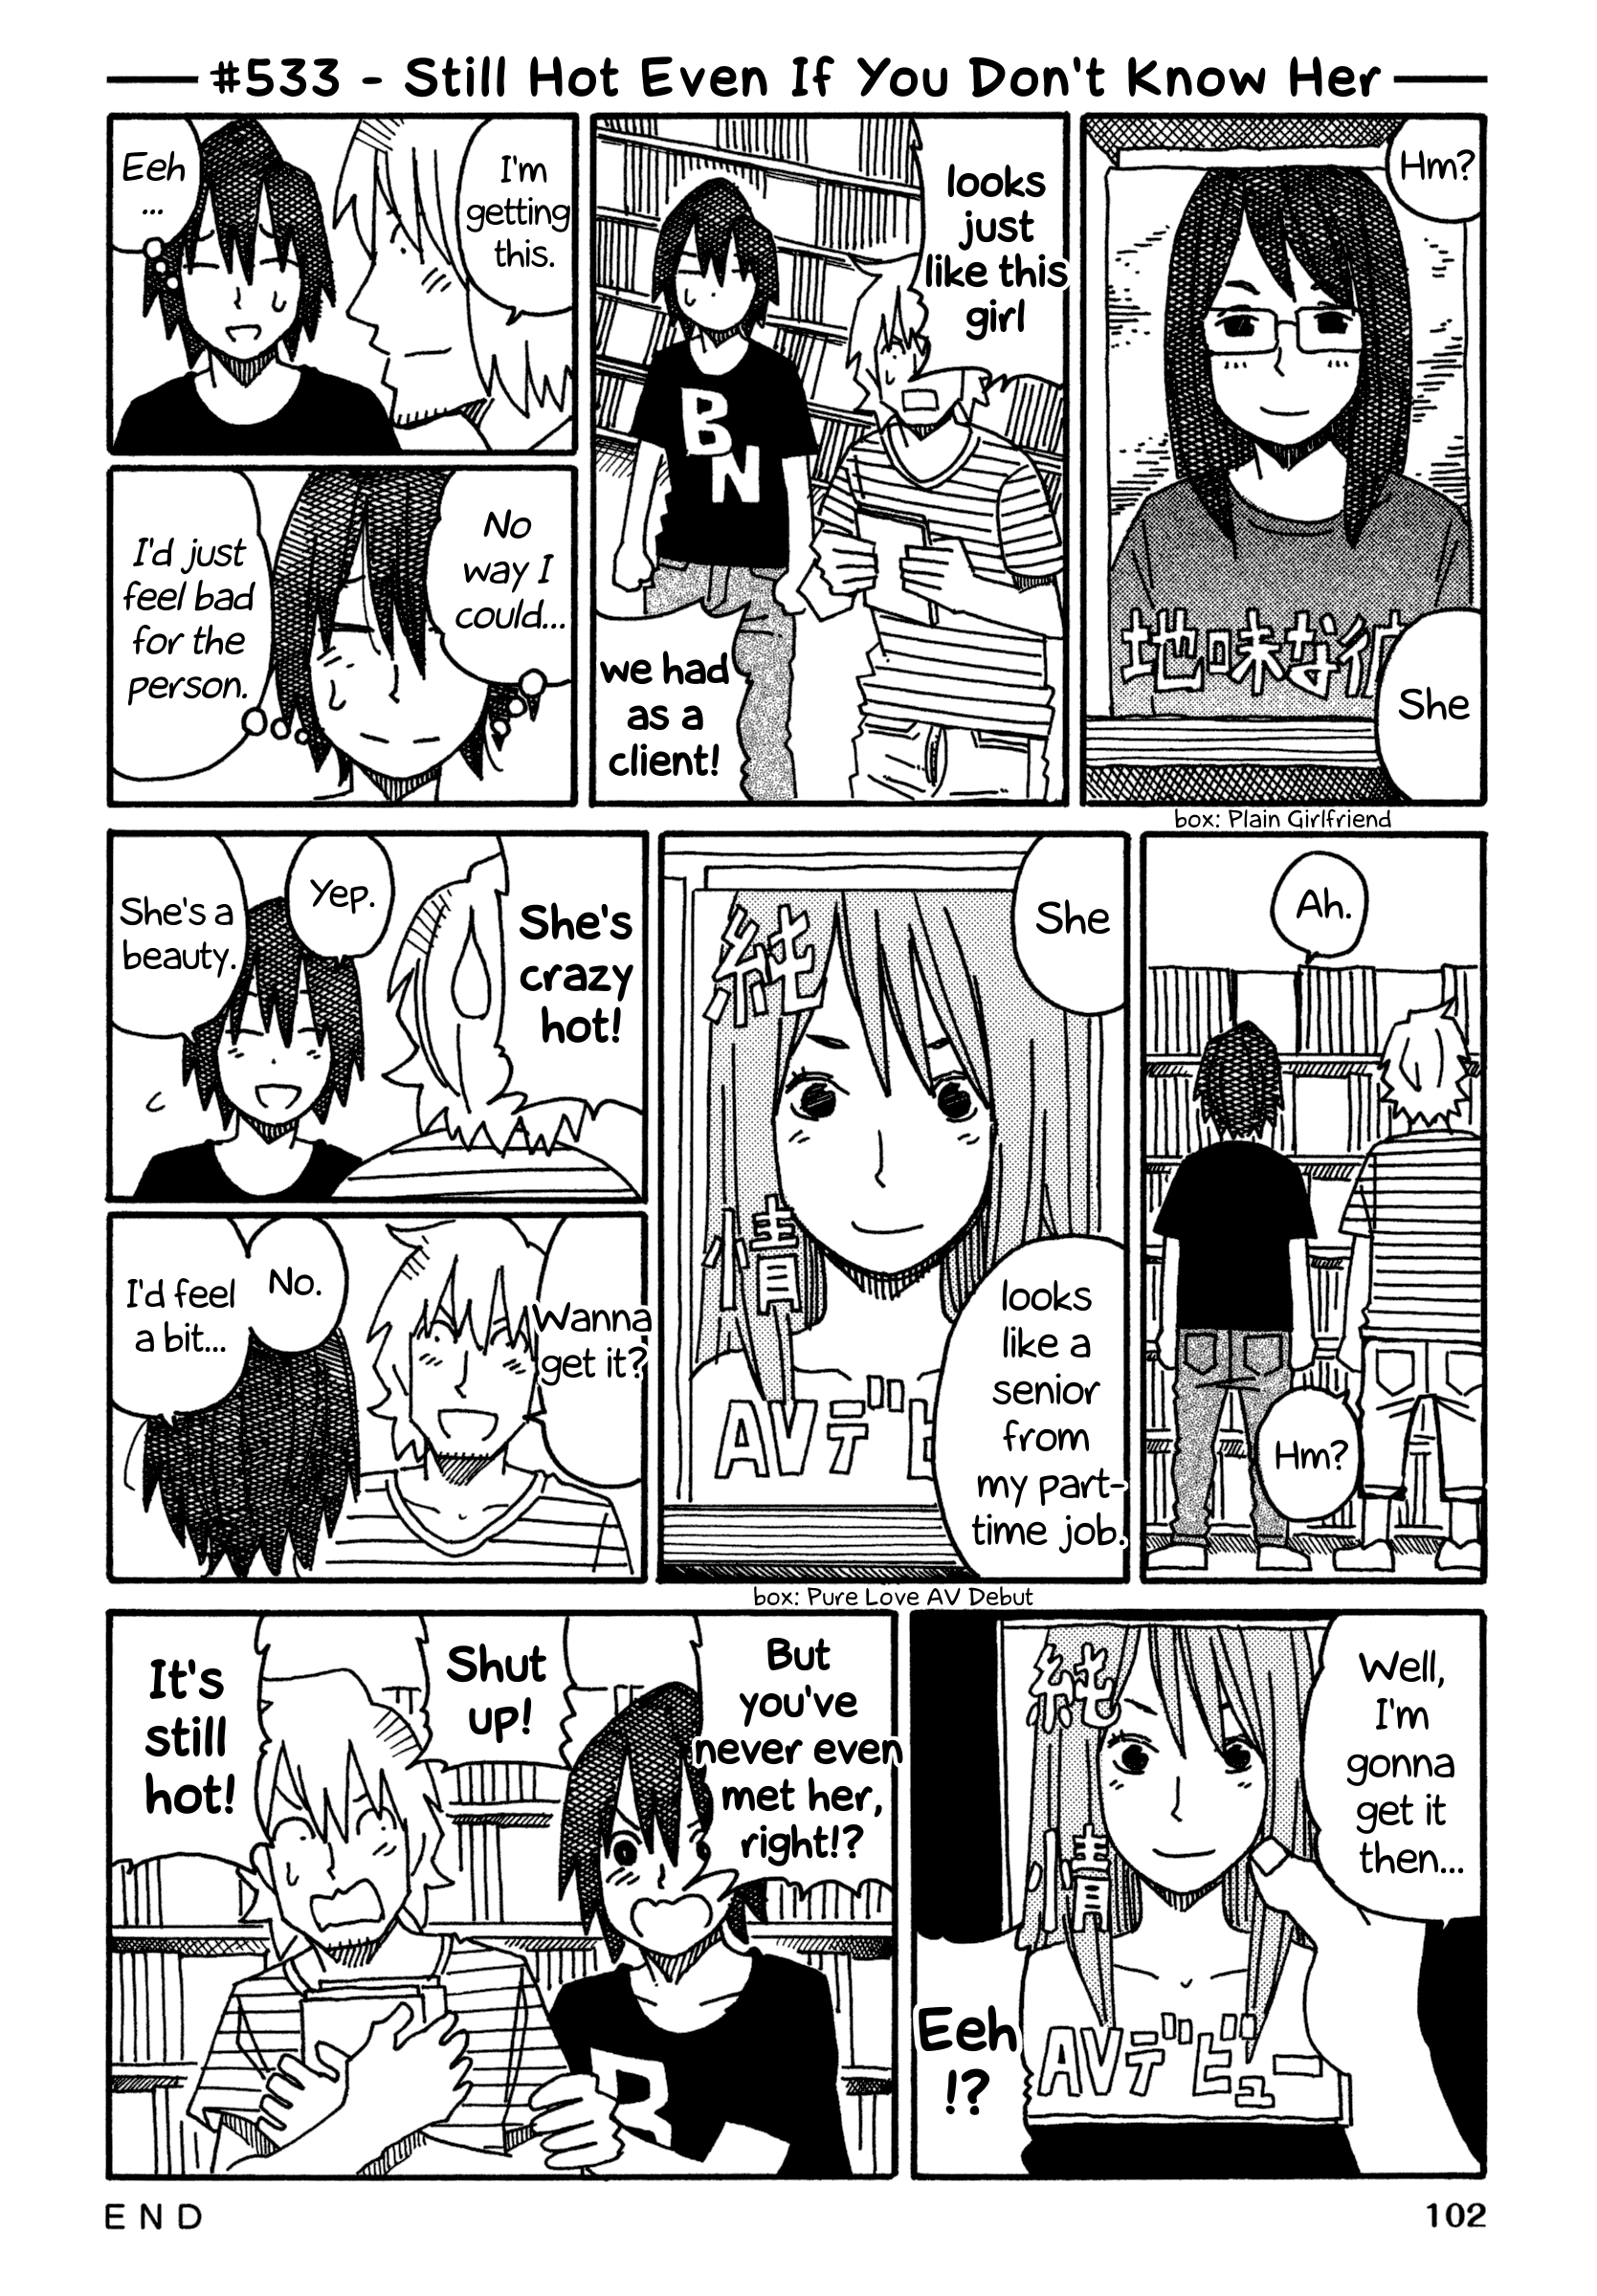 Hatarakanai Futari (The Jobless Siblings) Vol.9 Chapter 533: Still Hot Even If You Don't Know Her